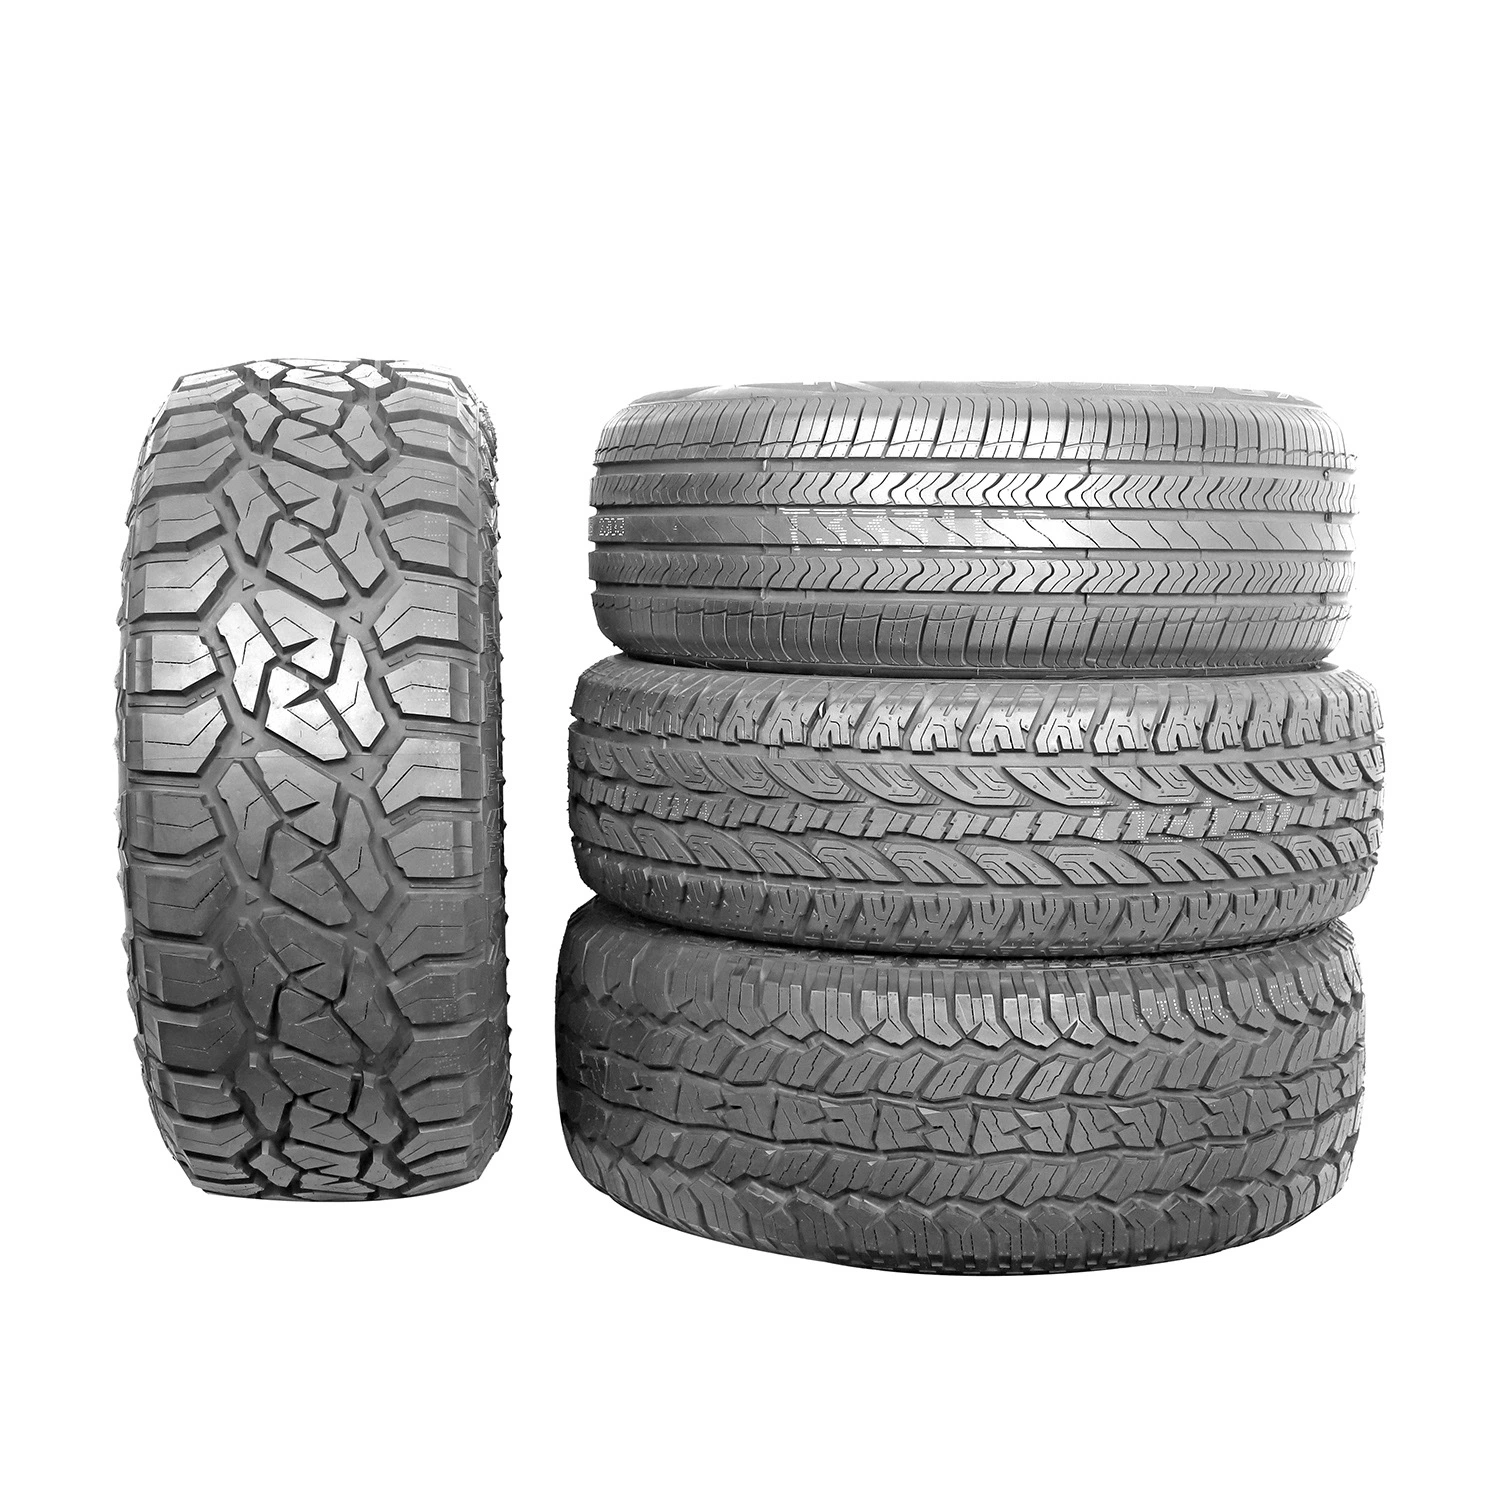 Cheap Not Used Tyres Premium Grade Not Used Car Tires 185/55R16 for Sale Low Noise City Driving Passenger Car Eco Friendly 4X4 High Performance Rubber Car Tyres